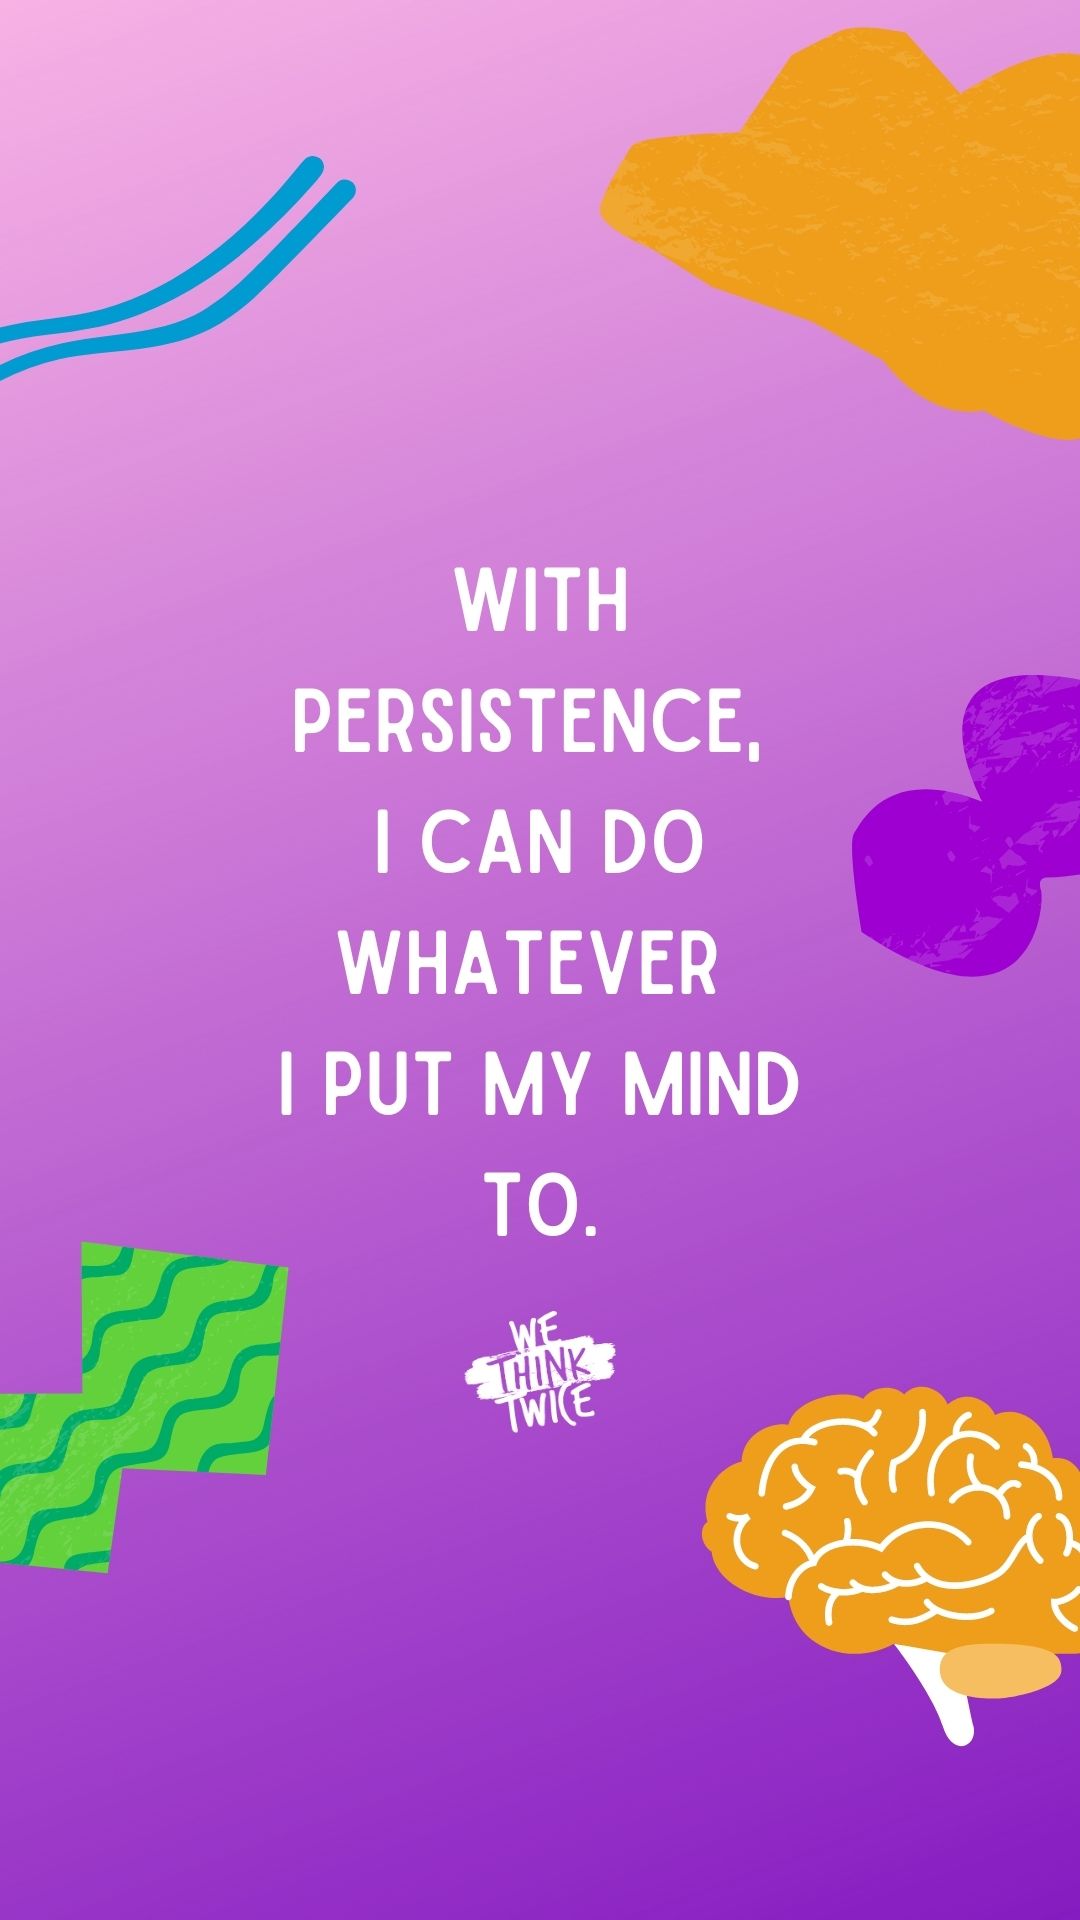 With persistence, I can do whatever I put my mind to